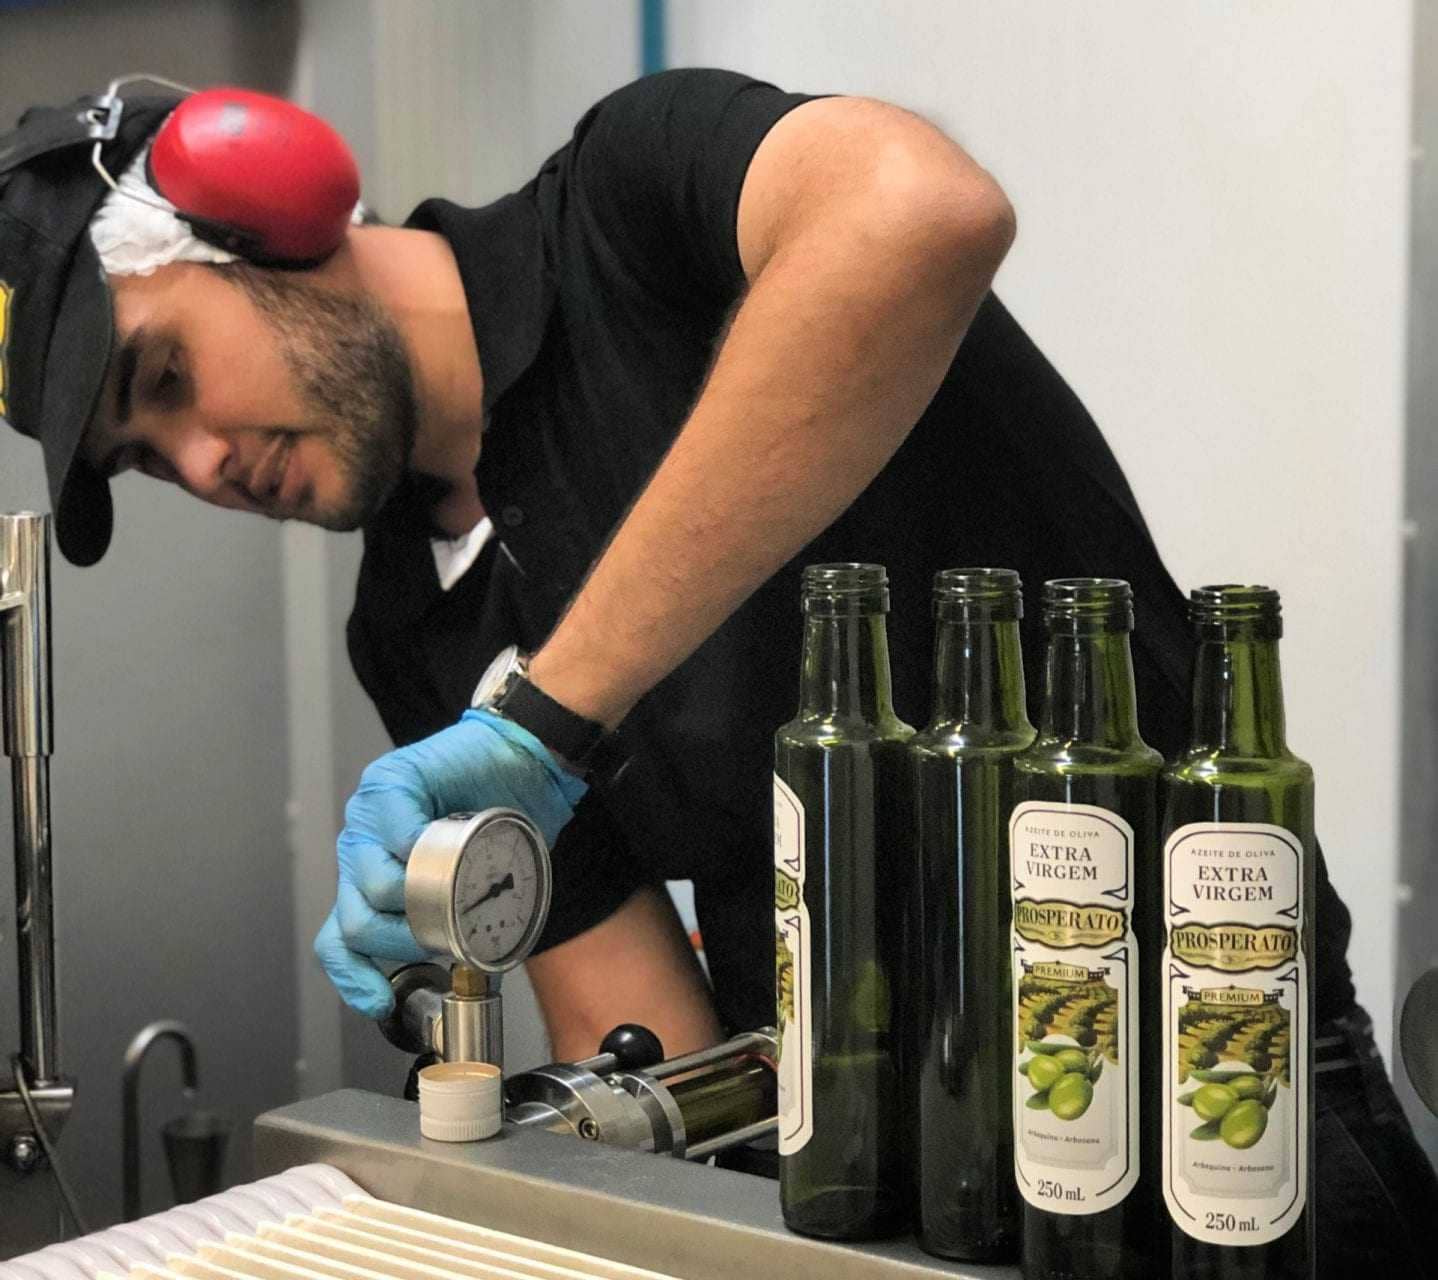 south-america-the-best-olive-oils-competitions-production-another-record-year-suggests-a-trend-in-brazil-producers-say-olive-oil-times